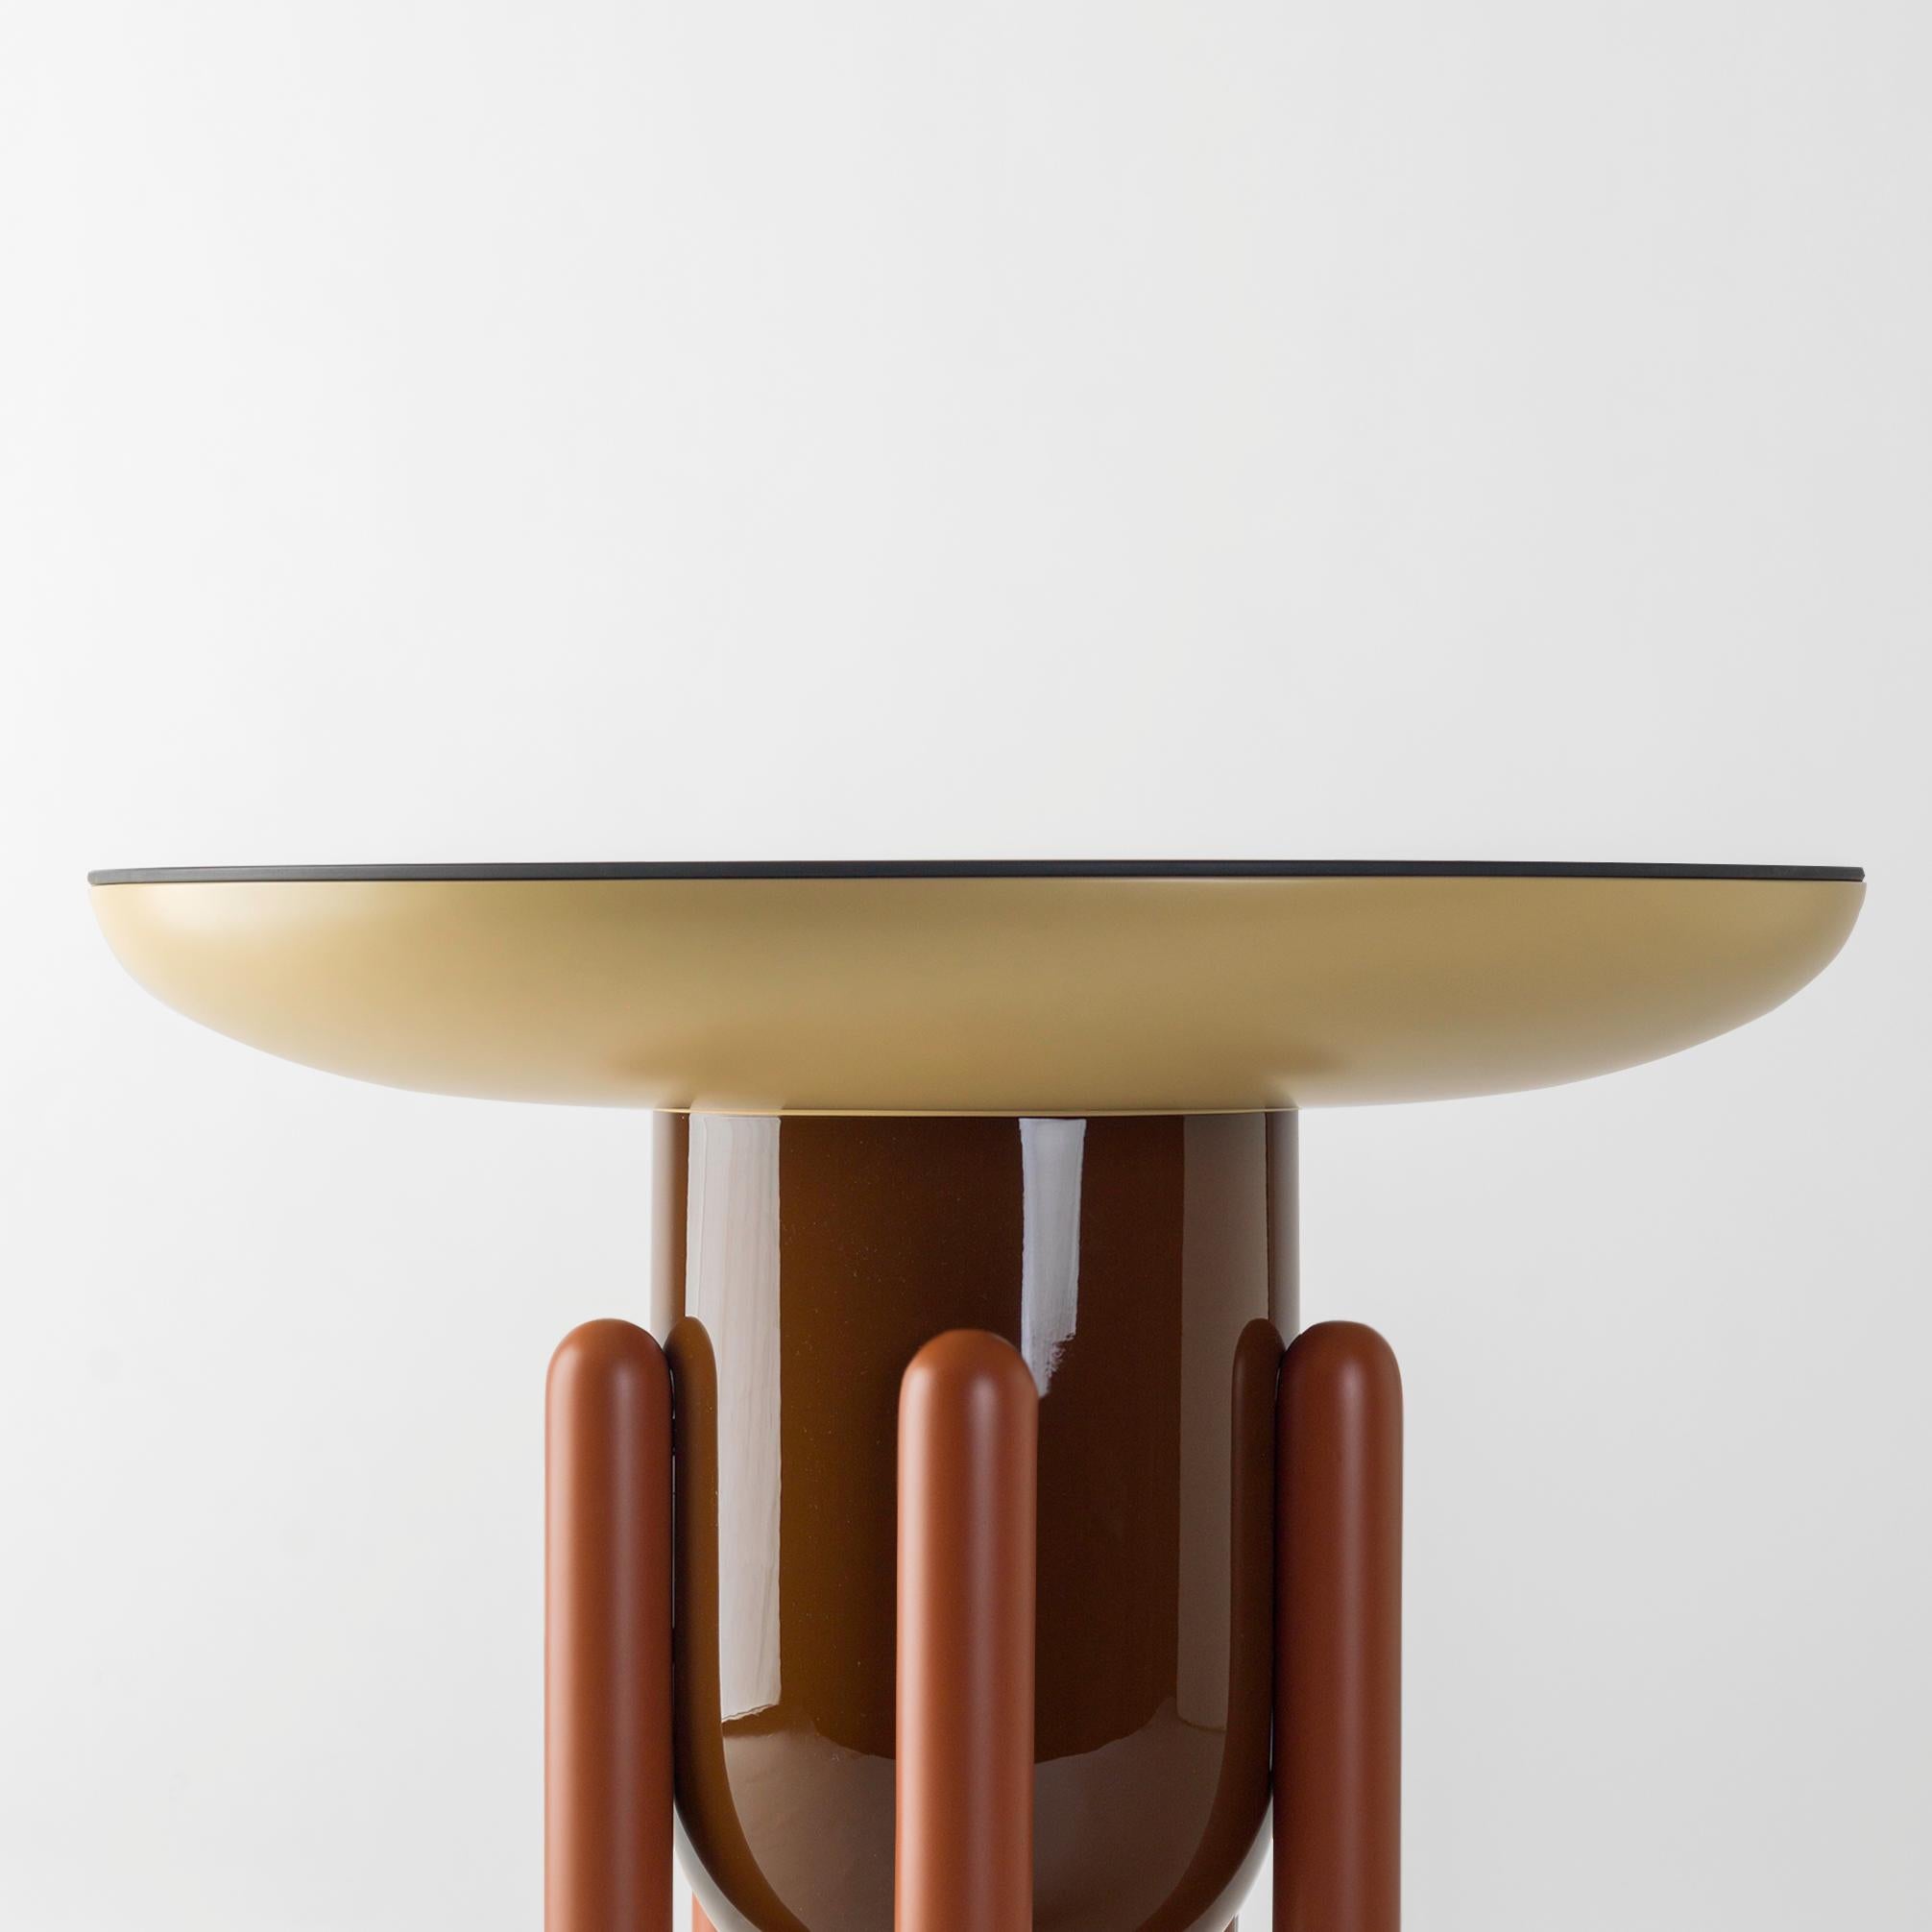 Multicolor explorer #02 table

Design by Jaime Hayon, 2019
Manufactured by BD Barcelona.

Lacquered fibreglass body. Solid turned wooden legs and lacquered. Painted glass table top.

Measure: 60 Ø x 46 cm

- Glass: RAL 7021
- Top: RAL 1001